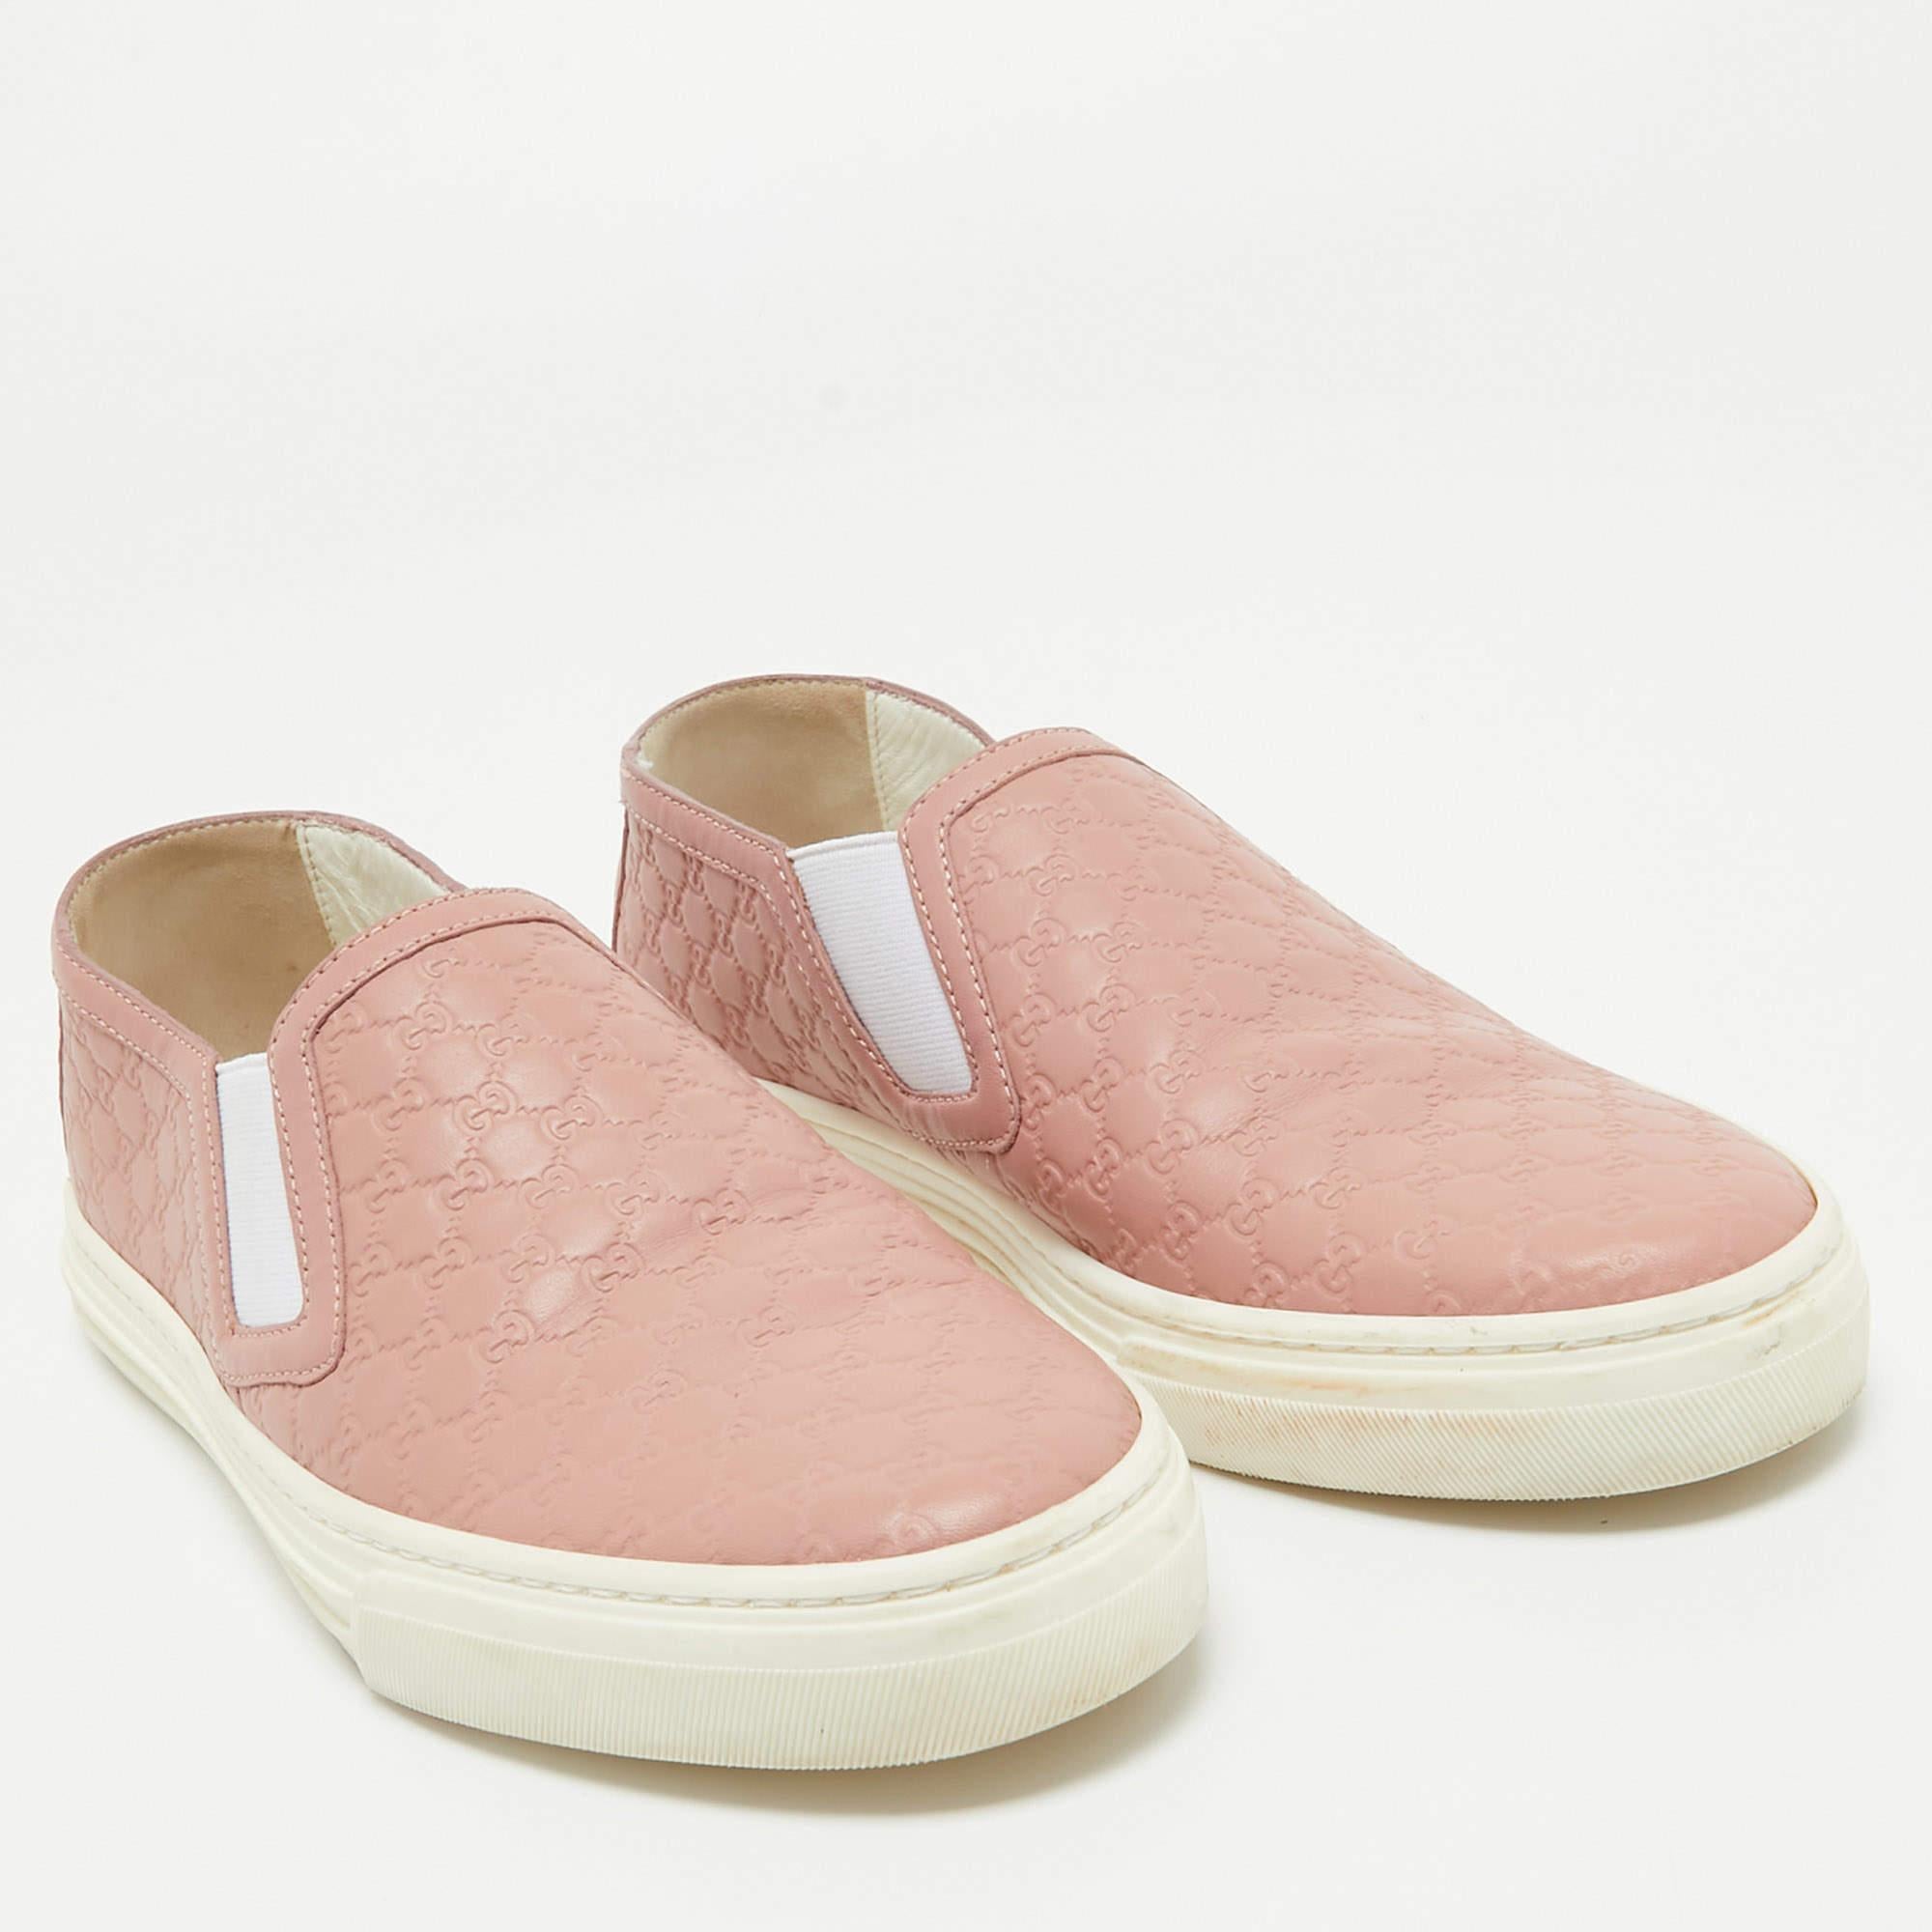 Gucci Pink Microguccissima Leather Slip On Sneakers Size 35.5 For Sale 4